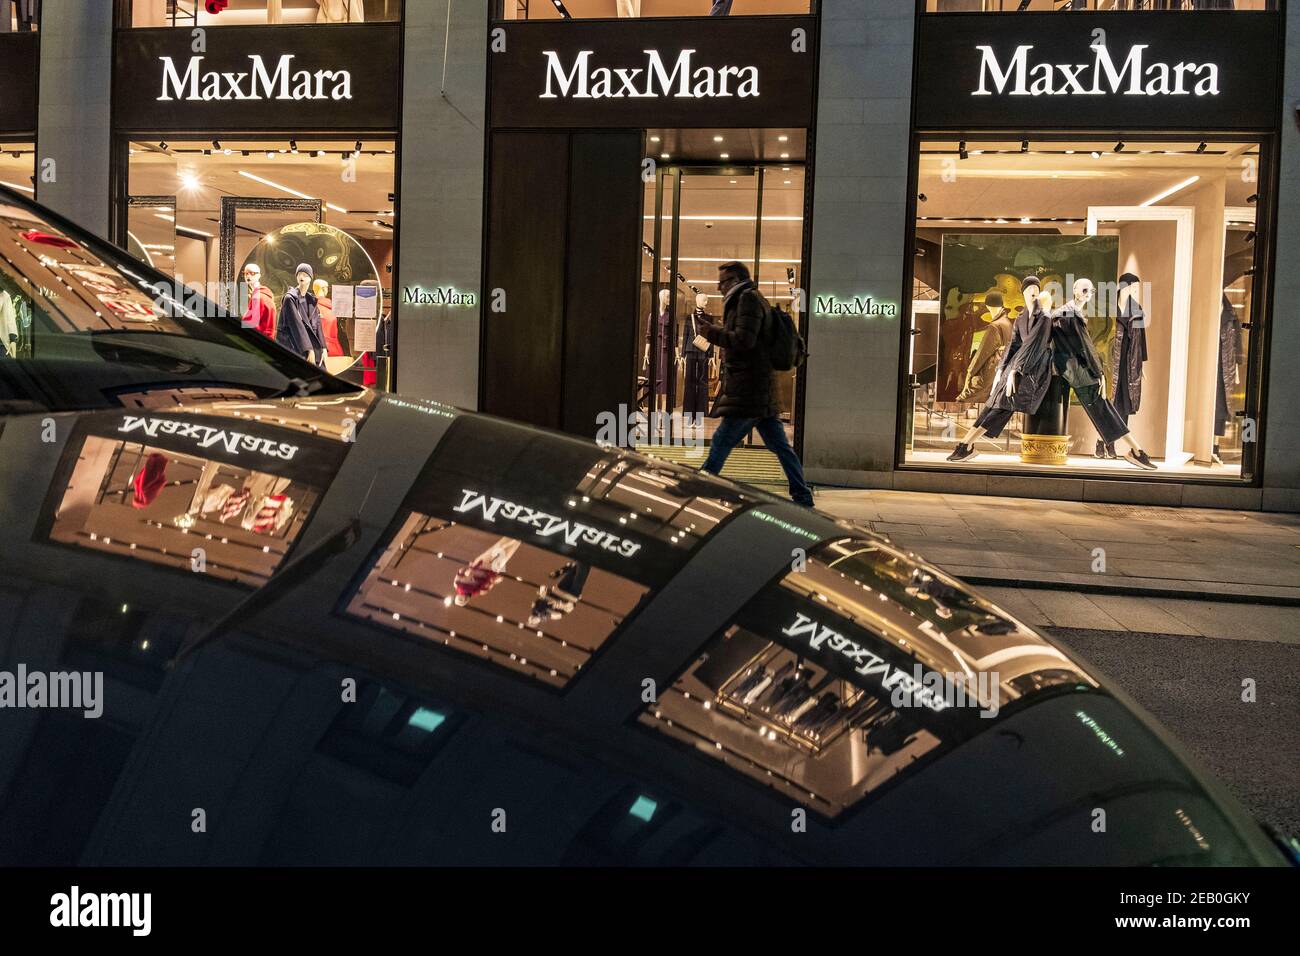 London, UK. 10th Feb, 2021. A man walking past the Max Mara in New Bond  Street in London, during the third nationwide lockdown.Max Mara is a  up-market ready-to-wear Italian fashion company. It